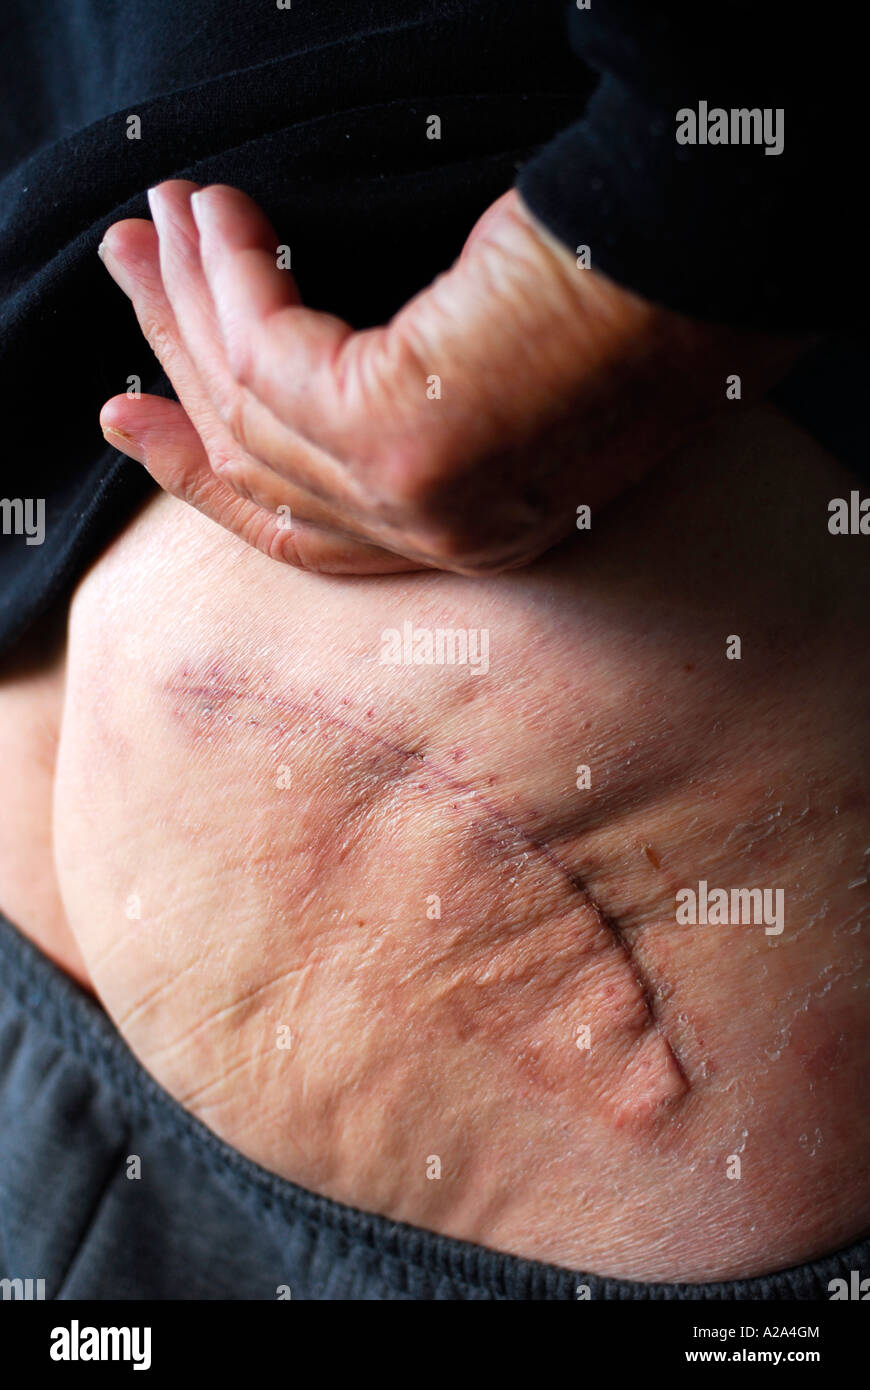 Scar from hip-replacement surgery on elderly man Stock Photo